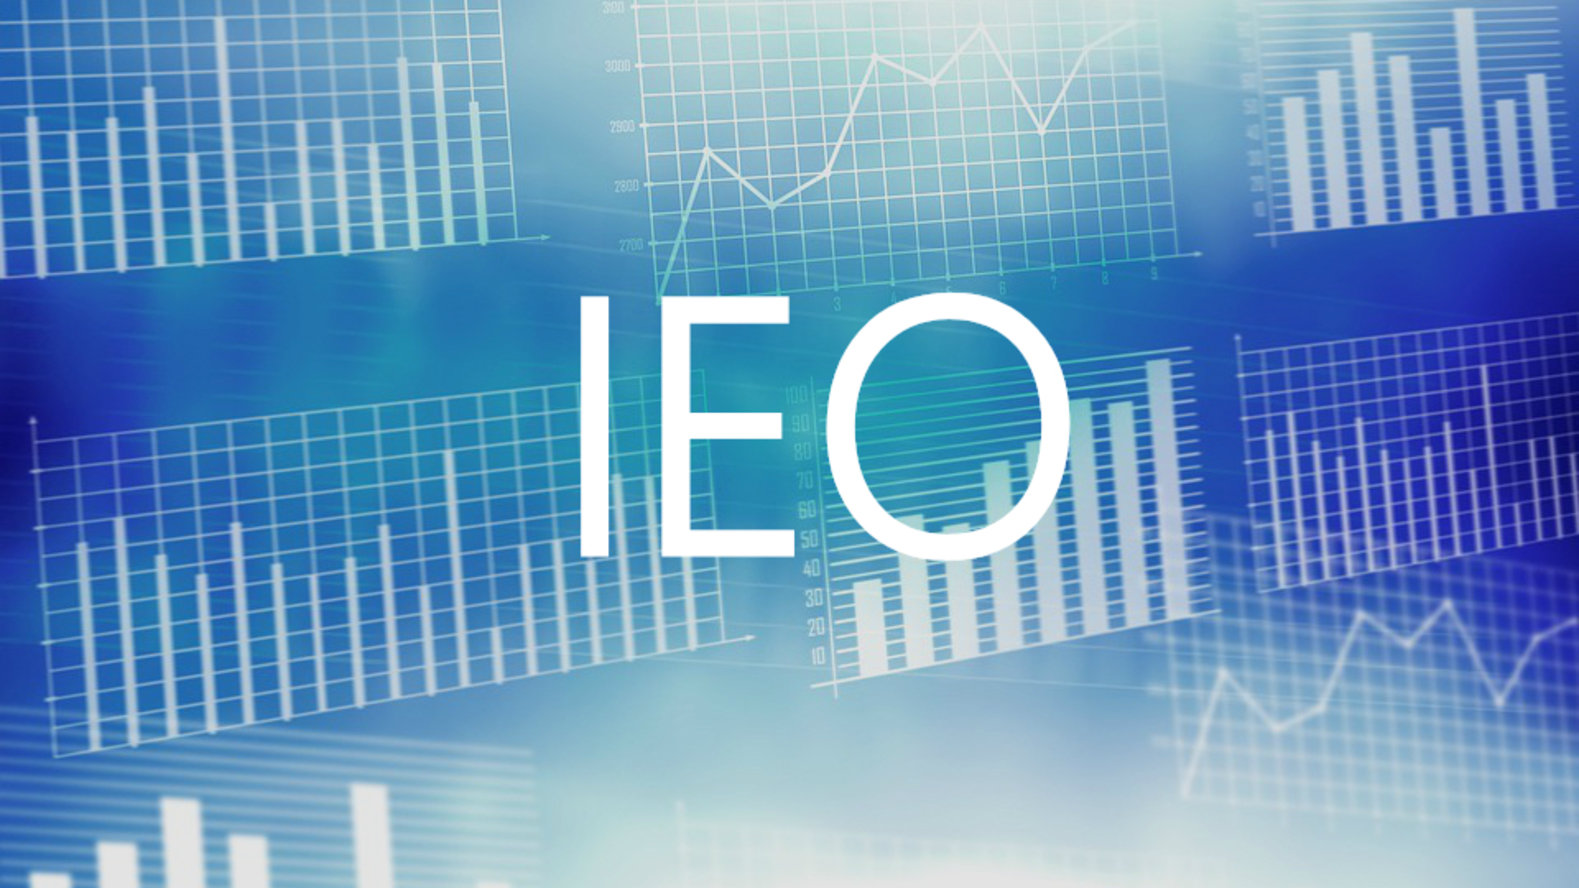 What is Initial Exchange Offering (IEO)